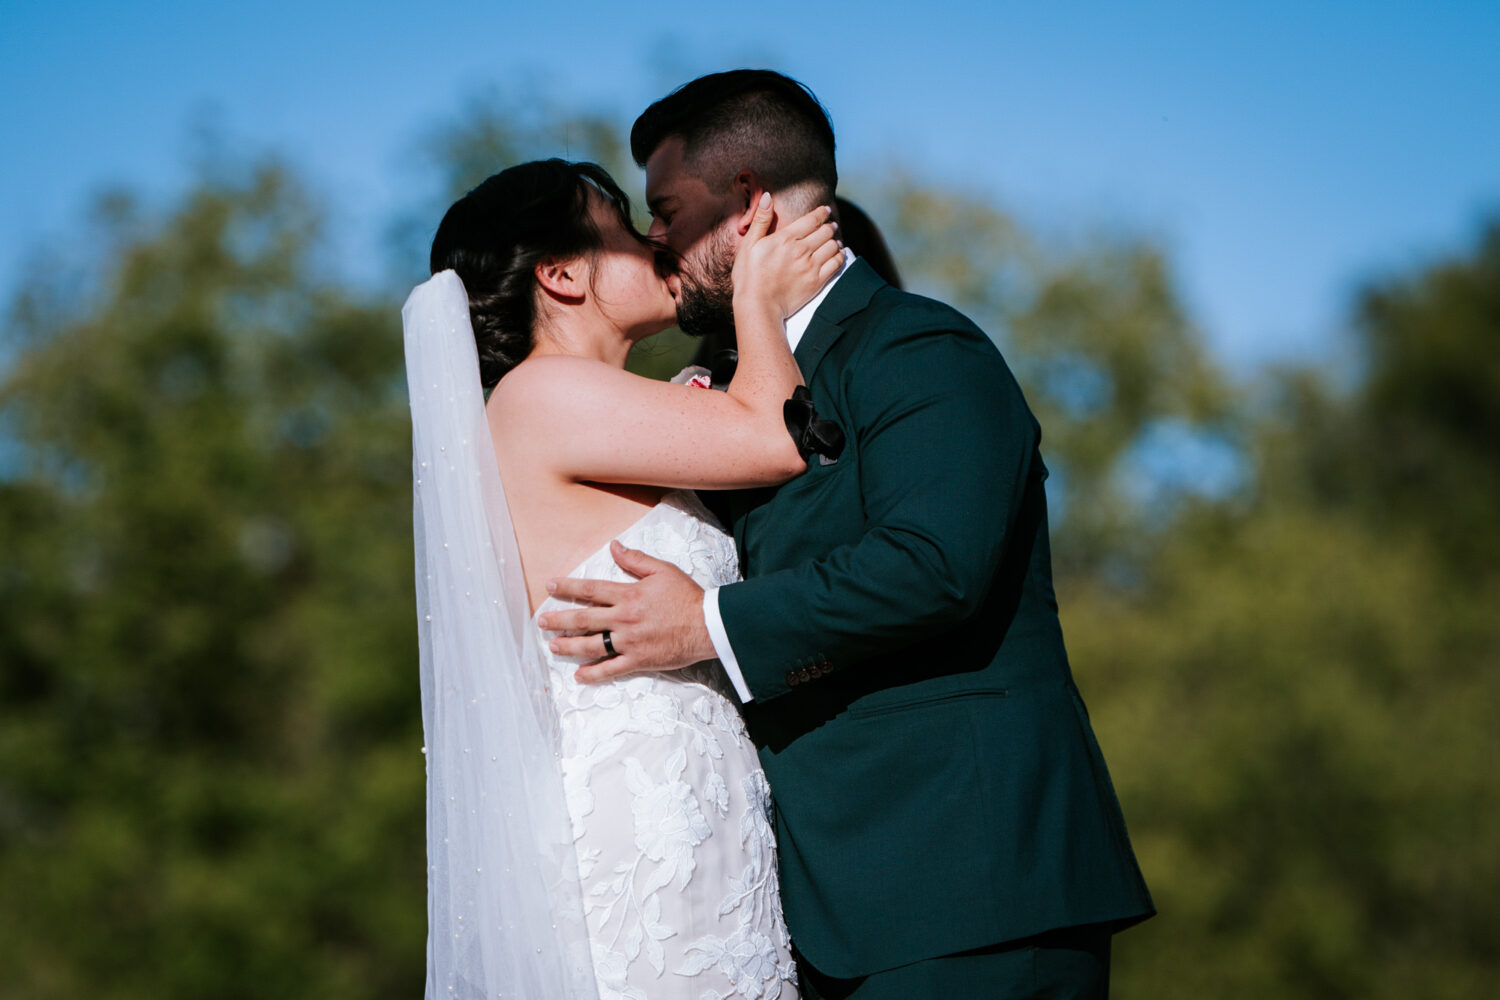 bride and groom share a first kiss at their wedding ceremony